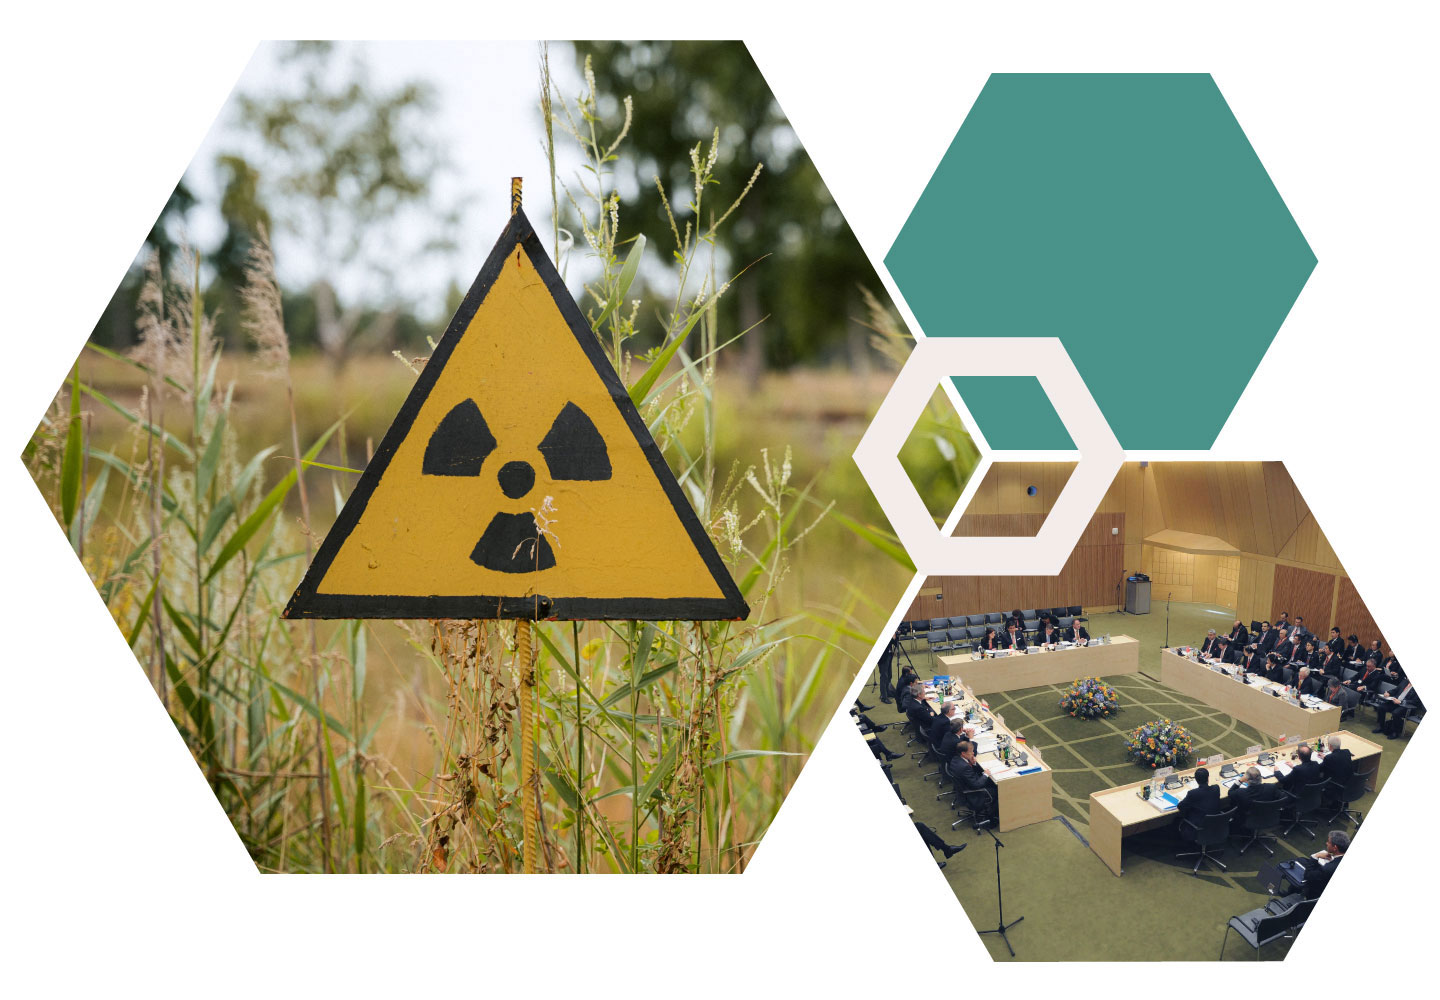 Hexagon collage with images of toxic warning sign in a field and a radiation gauge, and an image of a nuclear summit